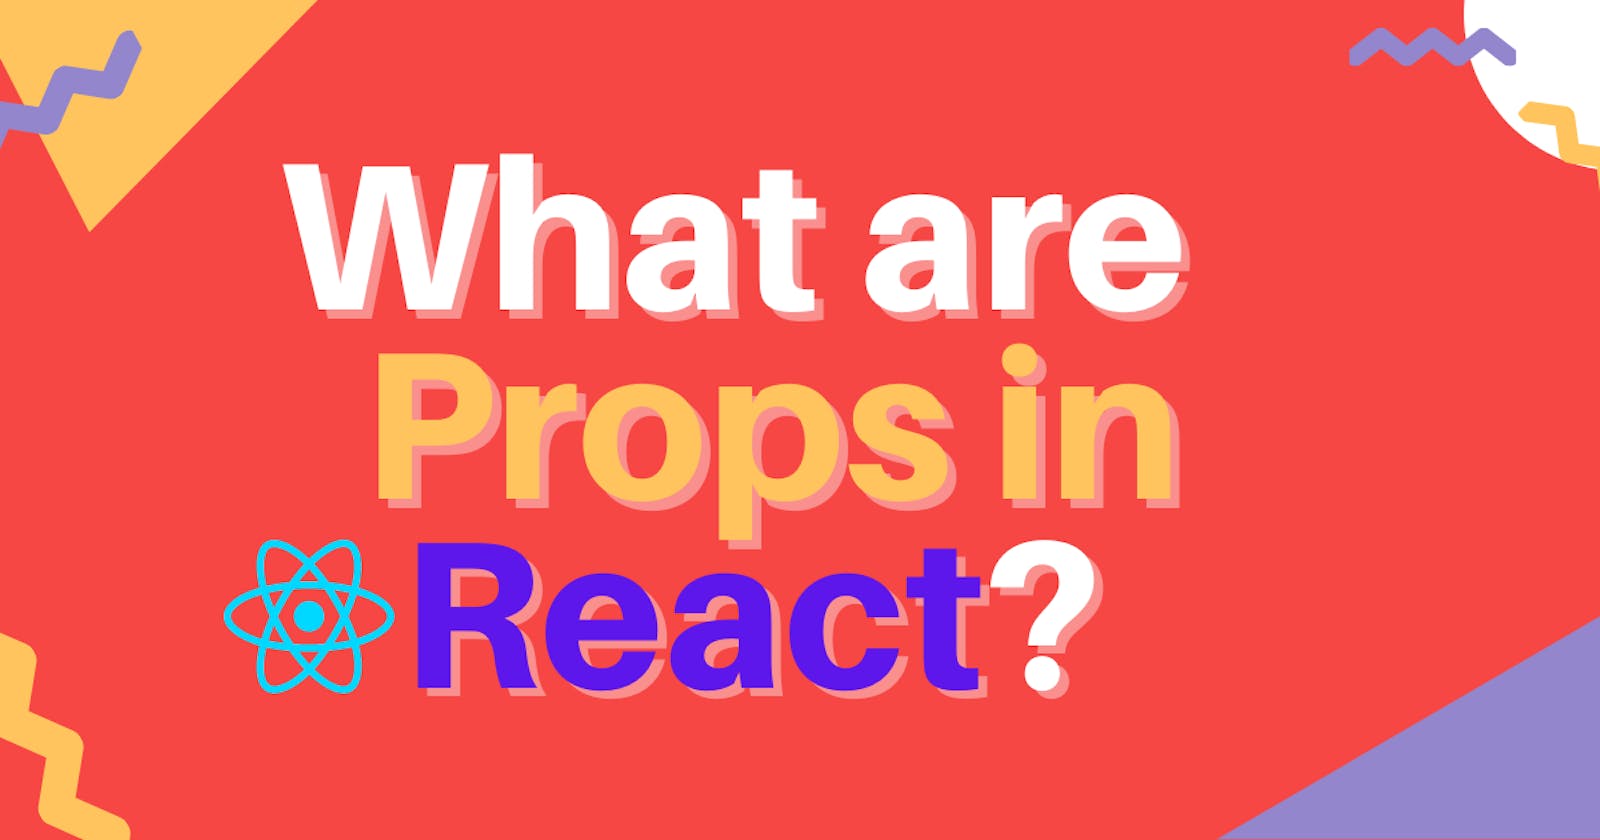 What are Props in React?